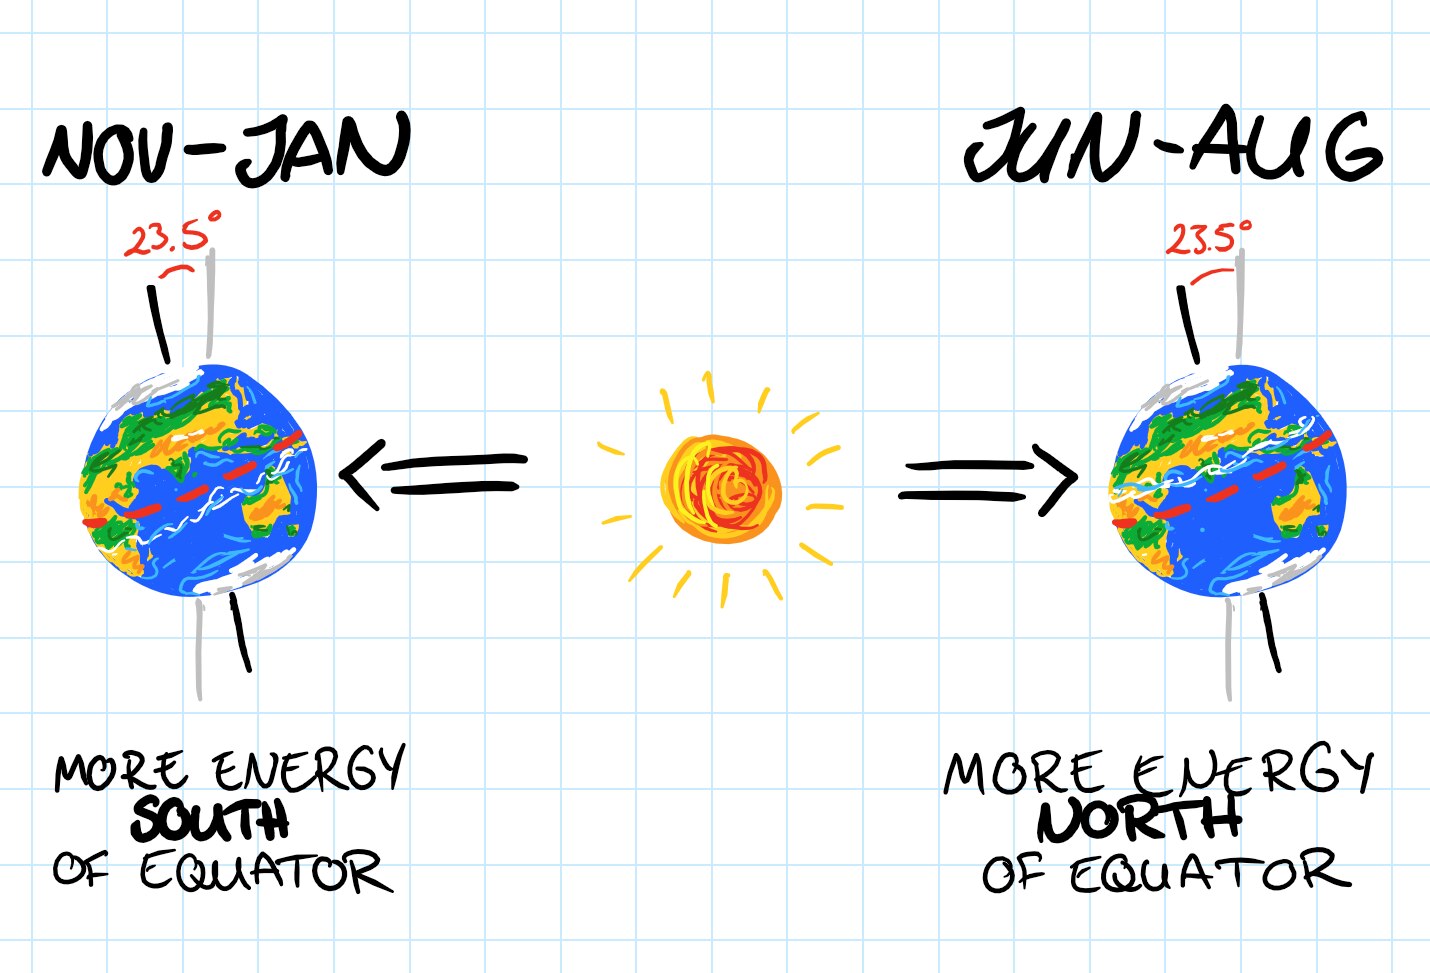 Awesome hand drawn graphic showing the southern hemisphere tilted towards the sun in our summer but away in winter